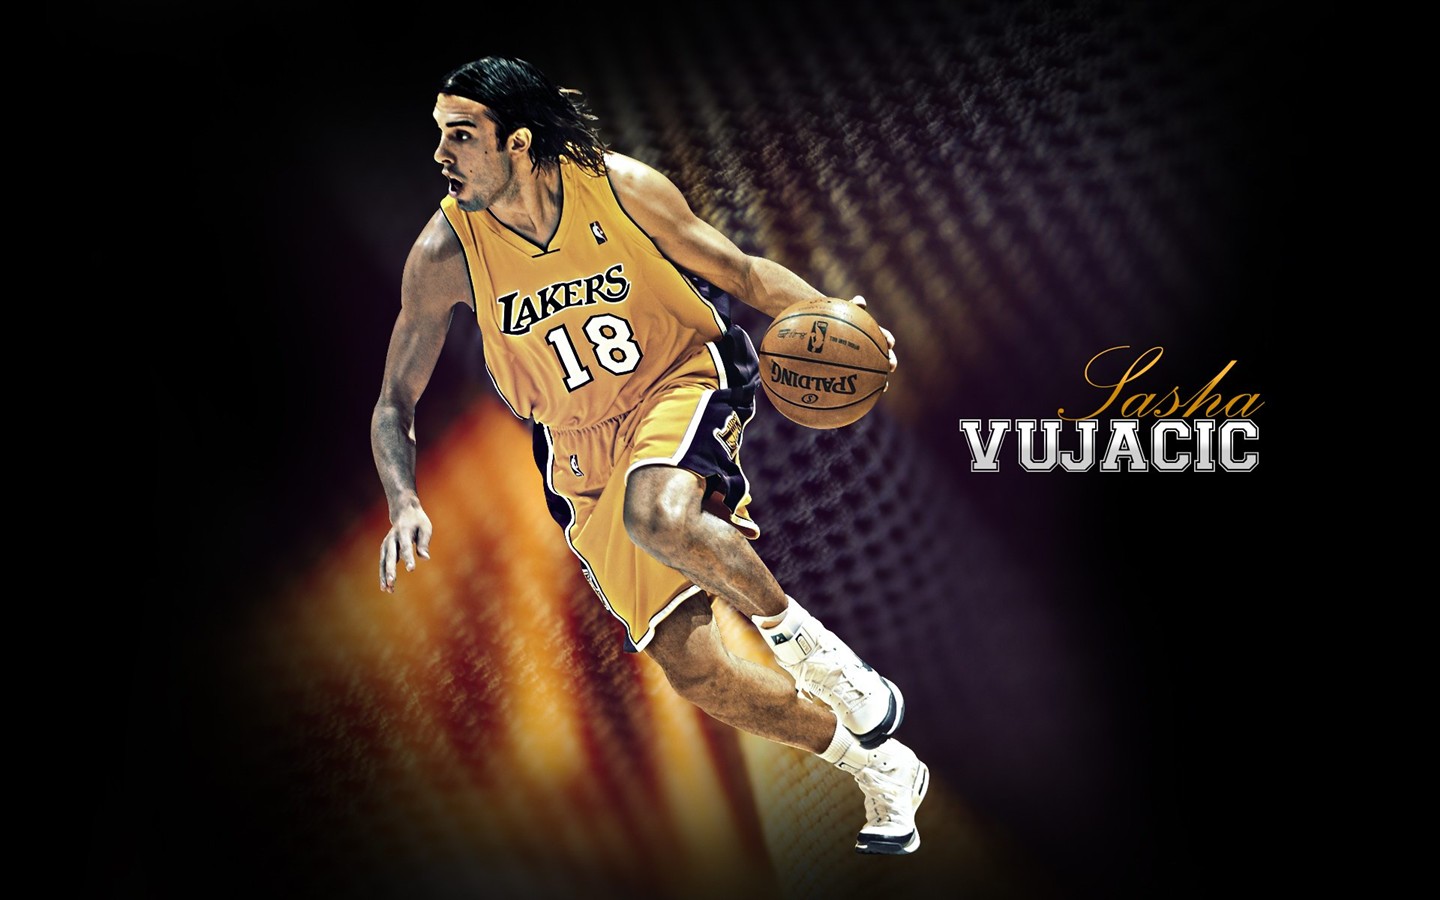 Los Angeles Lakers Wallpaper Oficial #22 - 1440x900